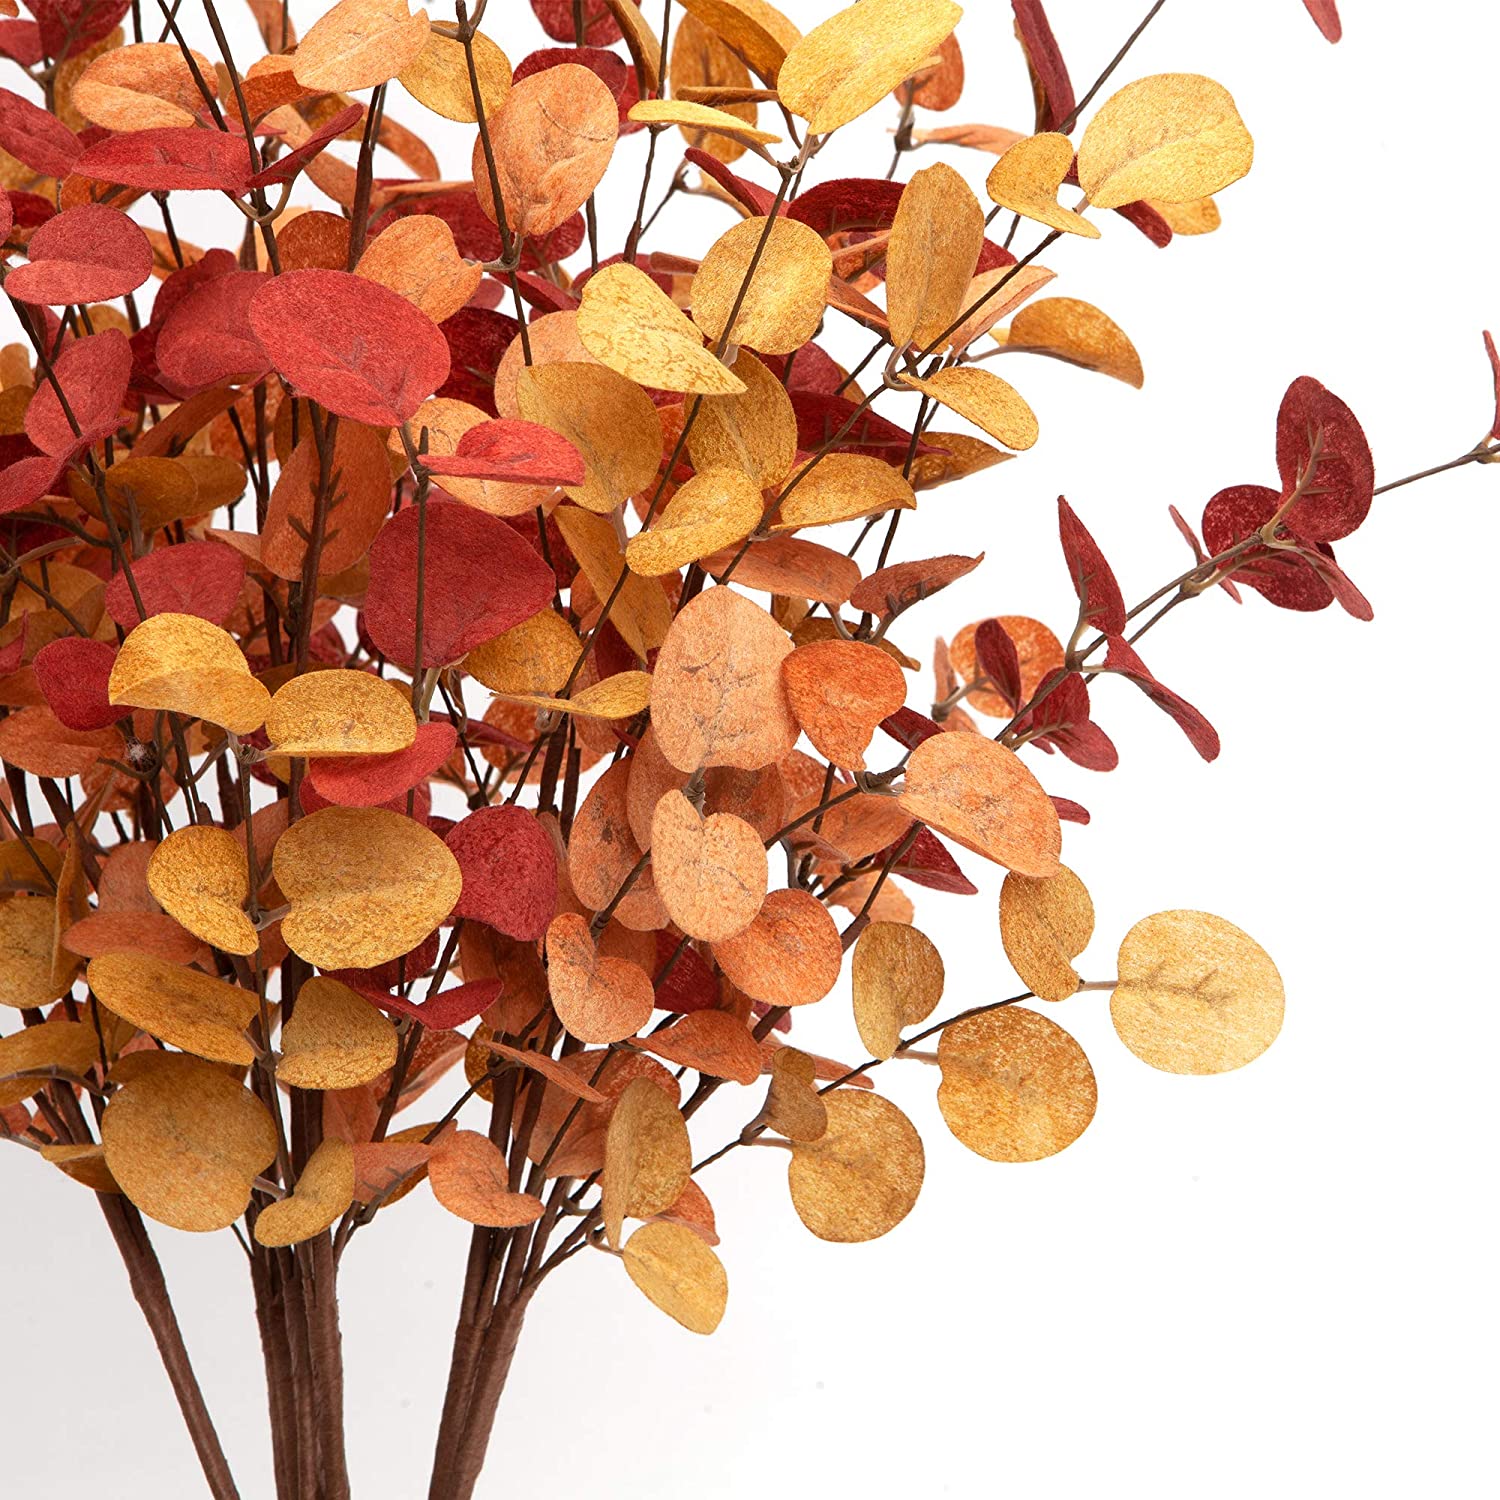 DecorX 6 Pcs Artificial Eucalyptus Stems Fall Decorations with Fall Eucalyptus Leaves Autumn Decorations for Office and Home Artificial Plants for Floral Arrangement